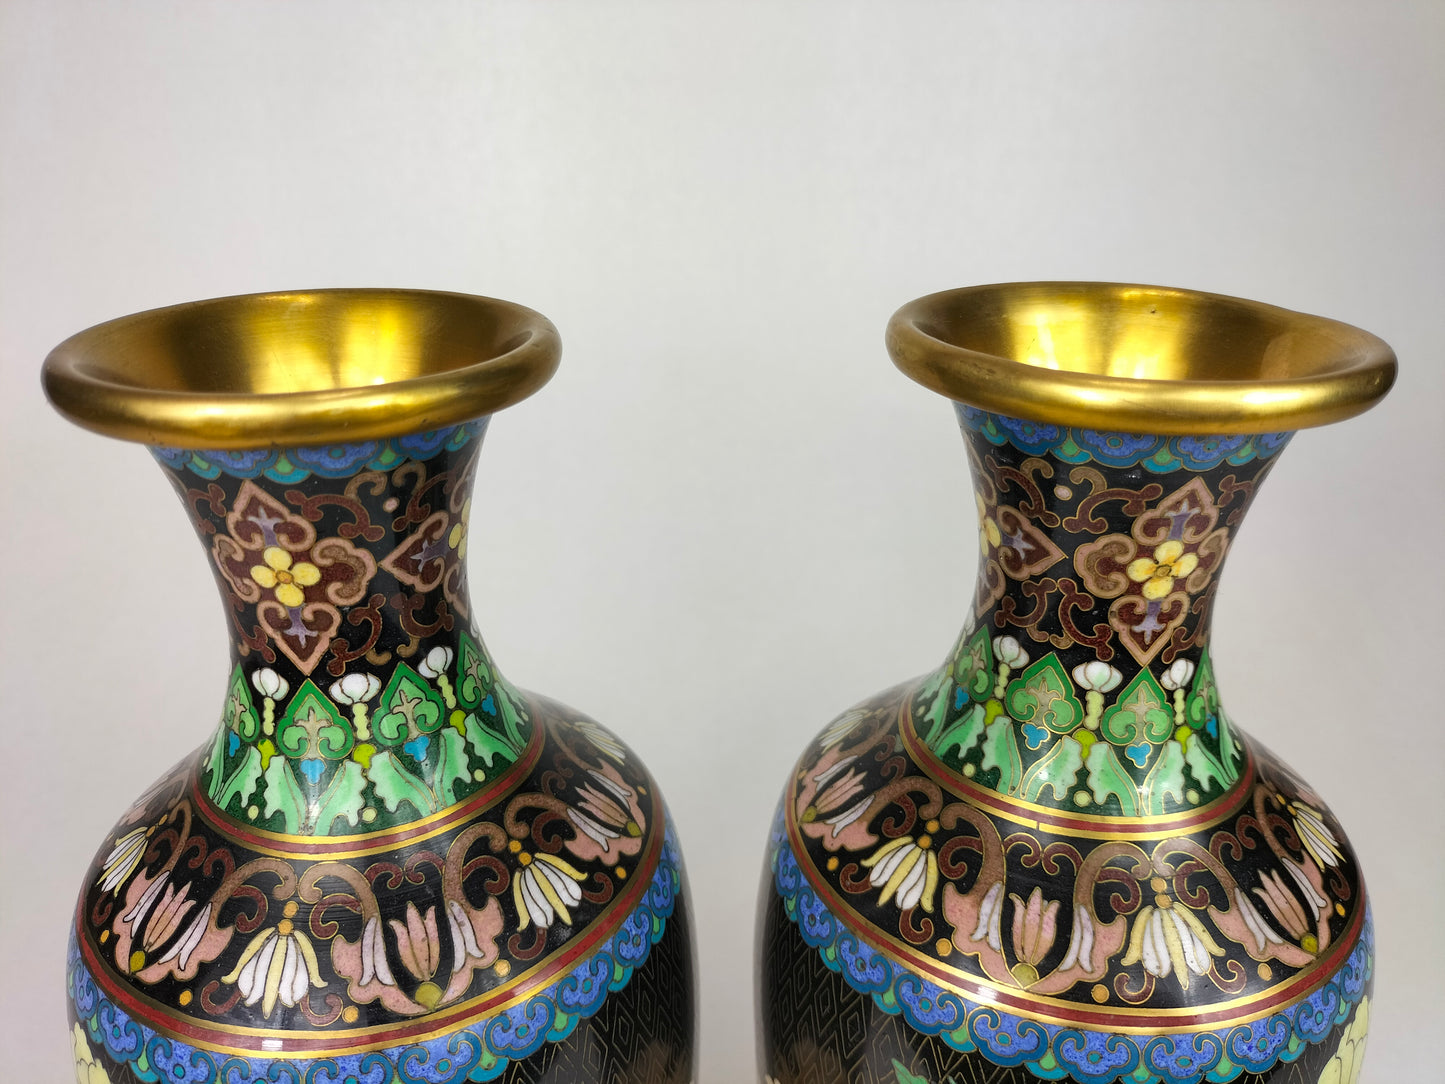 Pair of Chinese cloisonne vases decorated with birds and flowers // 20th century